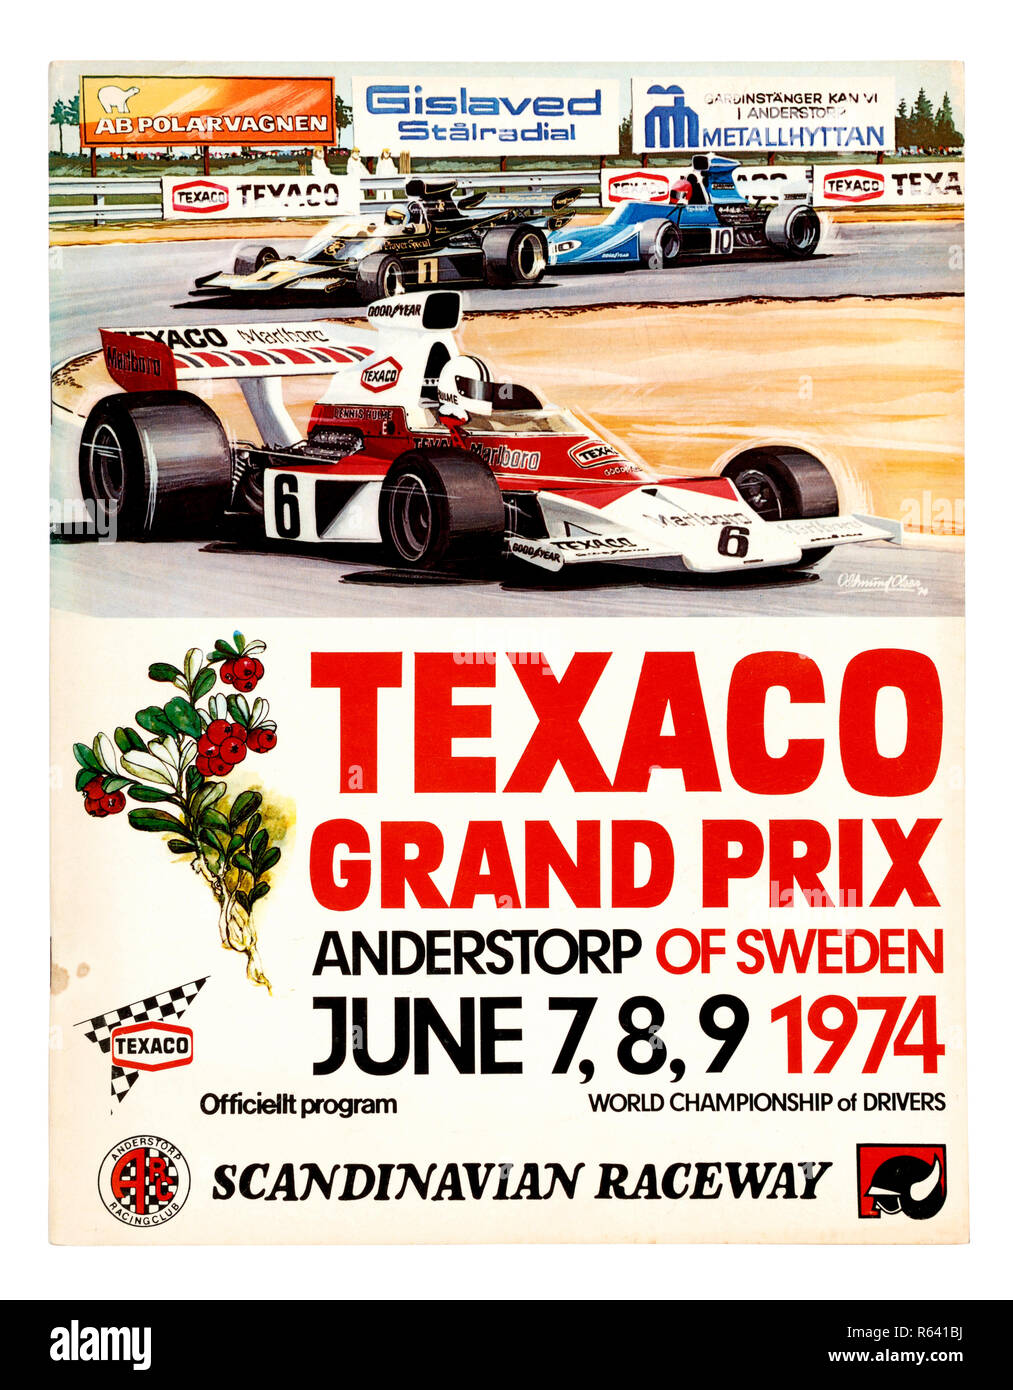 The front cover of a vintage official programme for the 1974 Grand Prix Formula 1 race at the Scandinavian Raceway in Anderstorp Sweden Stock Photo